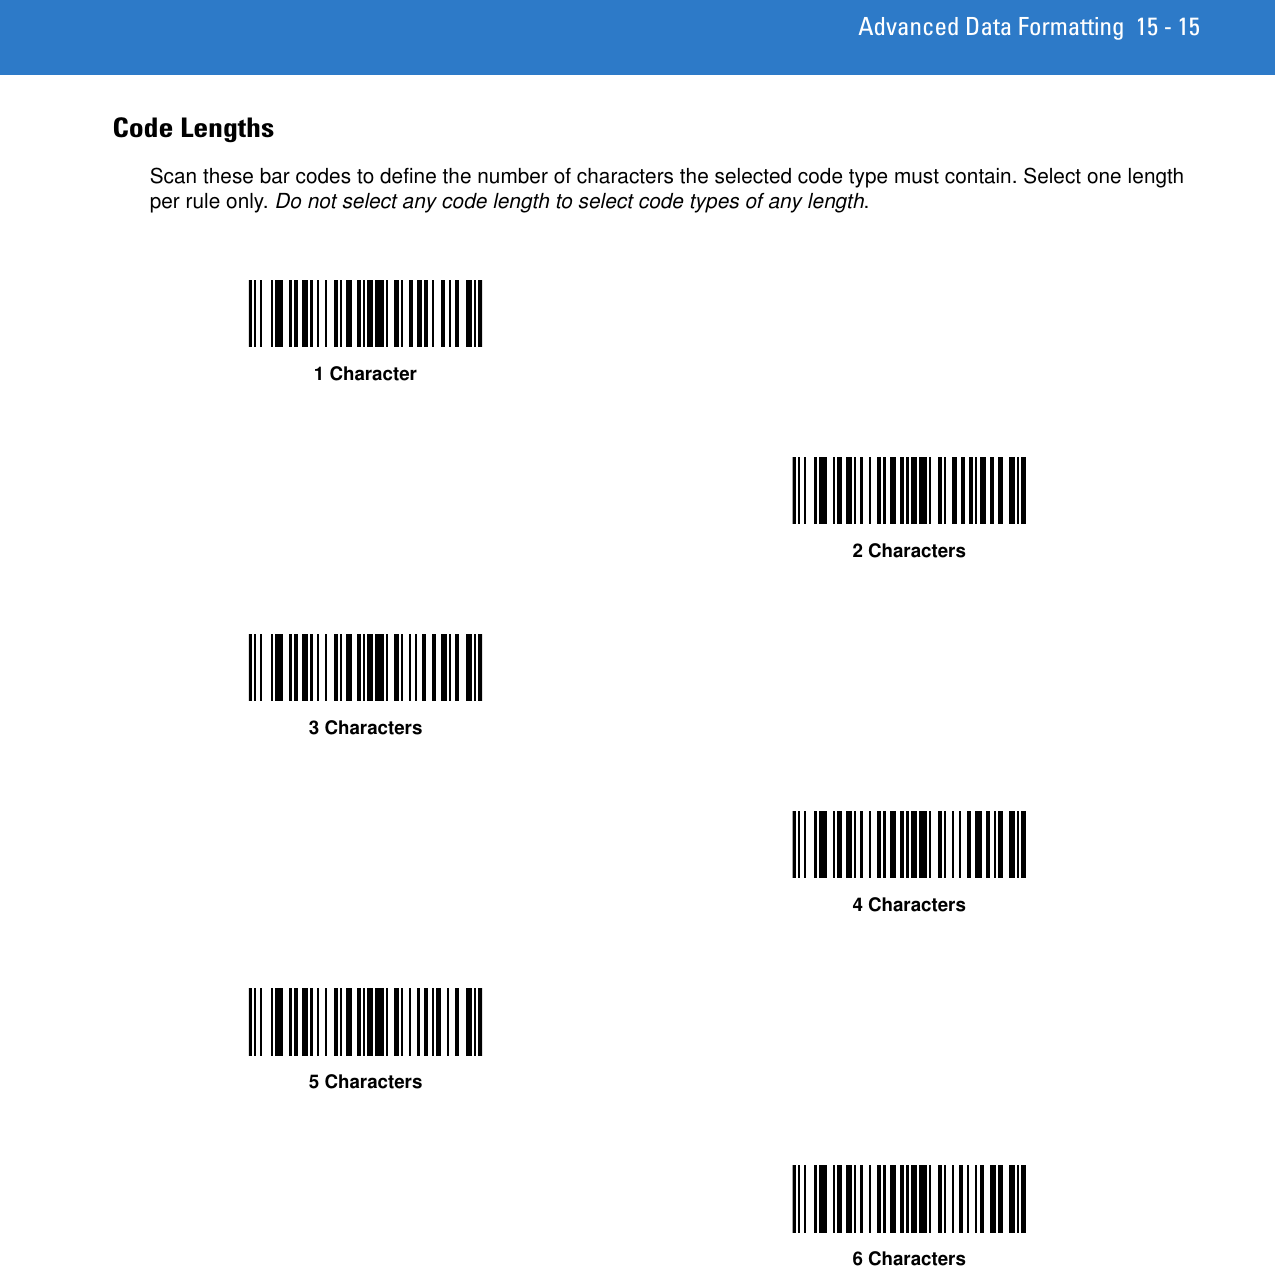 Advanced Data Formatting 15 - 15Code Lengths Scan these bar codes to define the number of characters the selected code type must contain. Select one length per rule only. Do not select any code length to select code types of any length.1 Character2 Characters3 Characters4 Characters5 Characters6 Characters